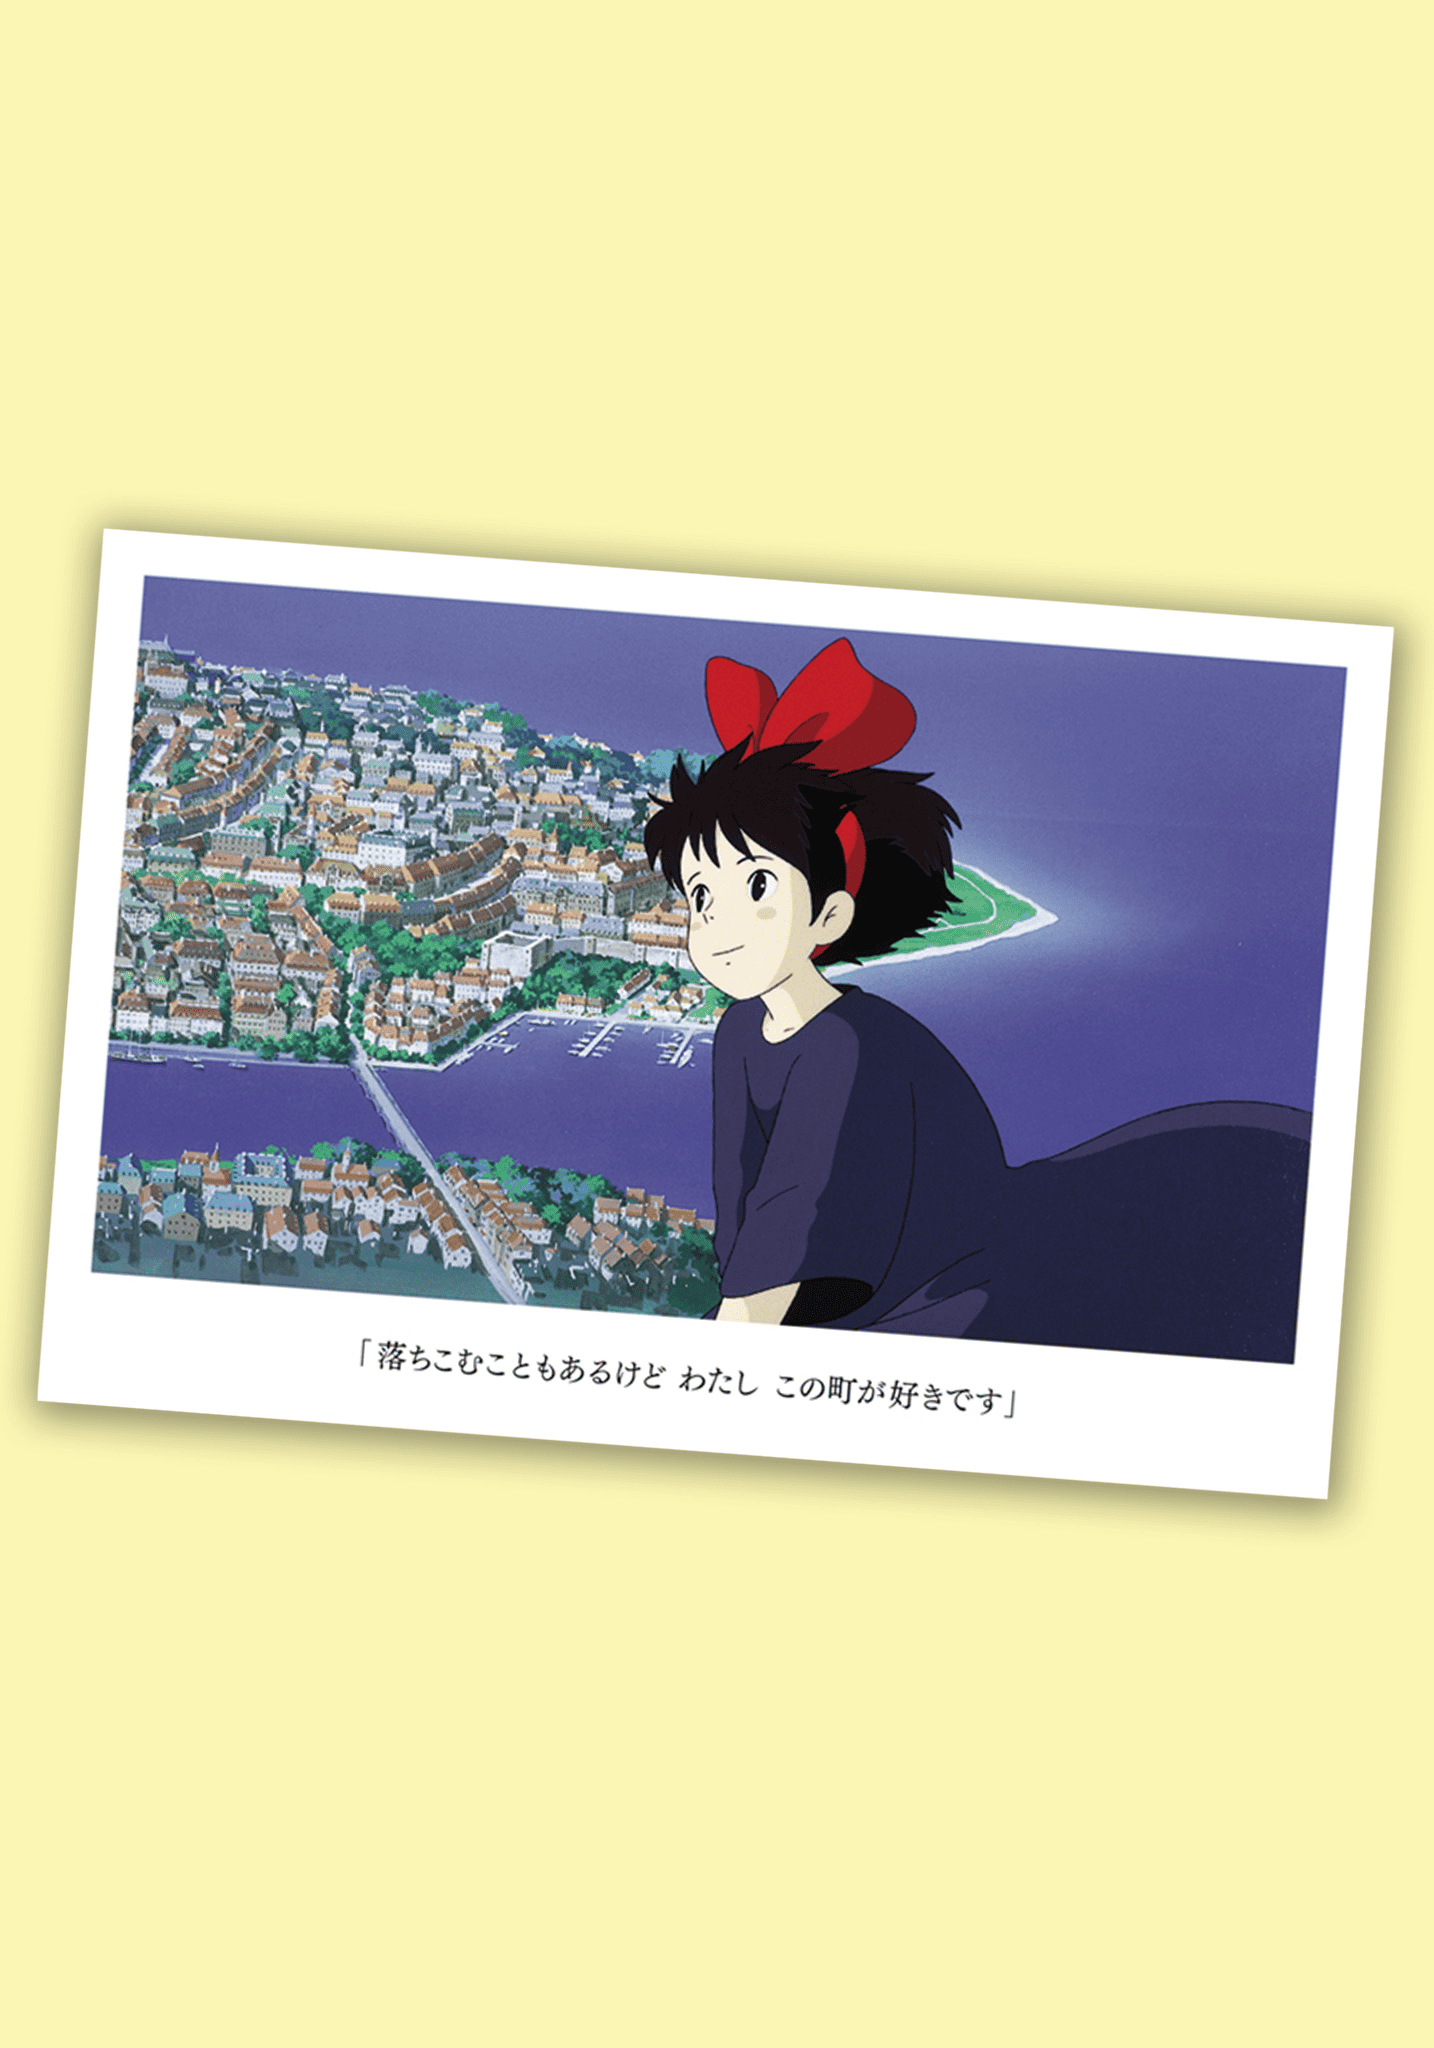 Clever Idiots Studio Ghibli Post Cards: Howl's Moving Castle, Totoro, Spirited Away, Kiki Kiki's Delivery Service (B) Kawaii Gifts 4961524842933